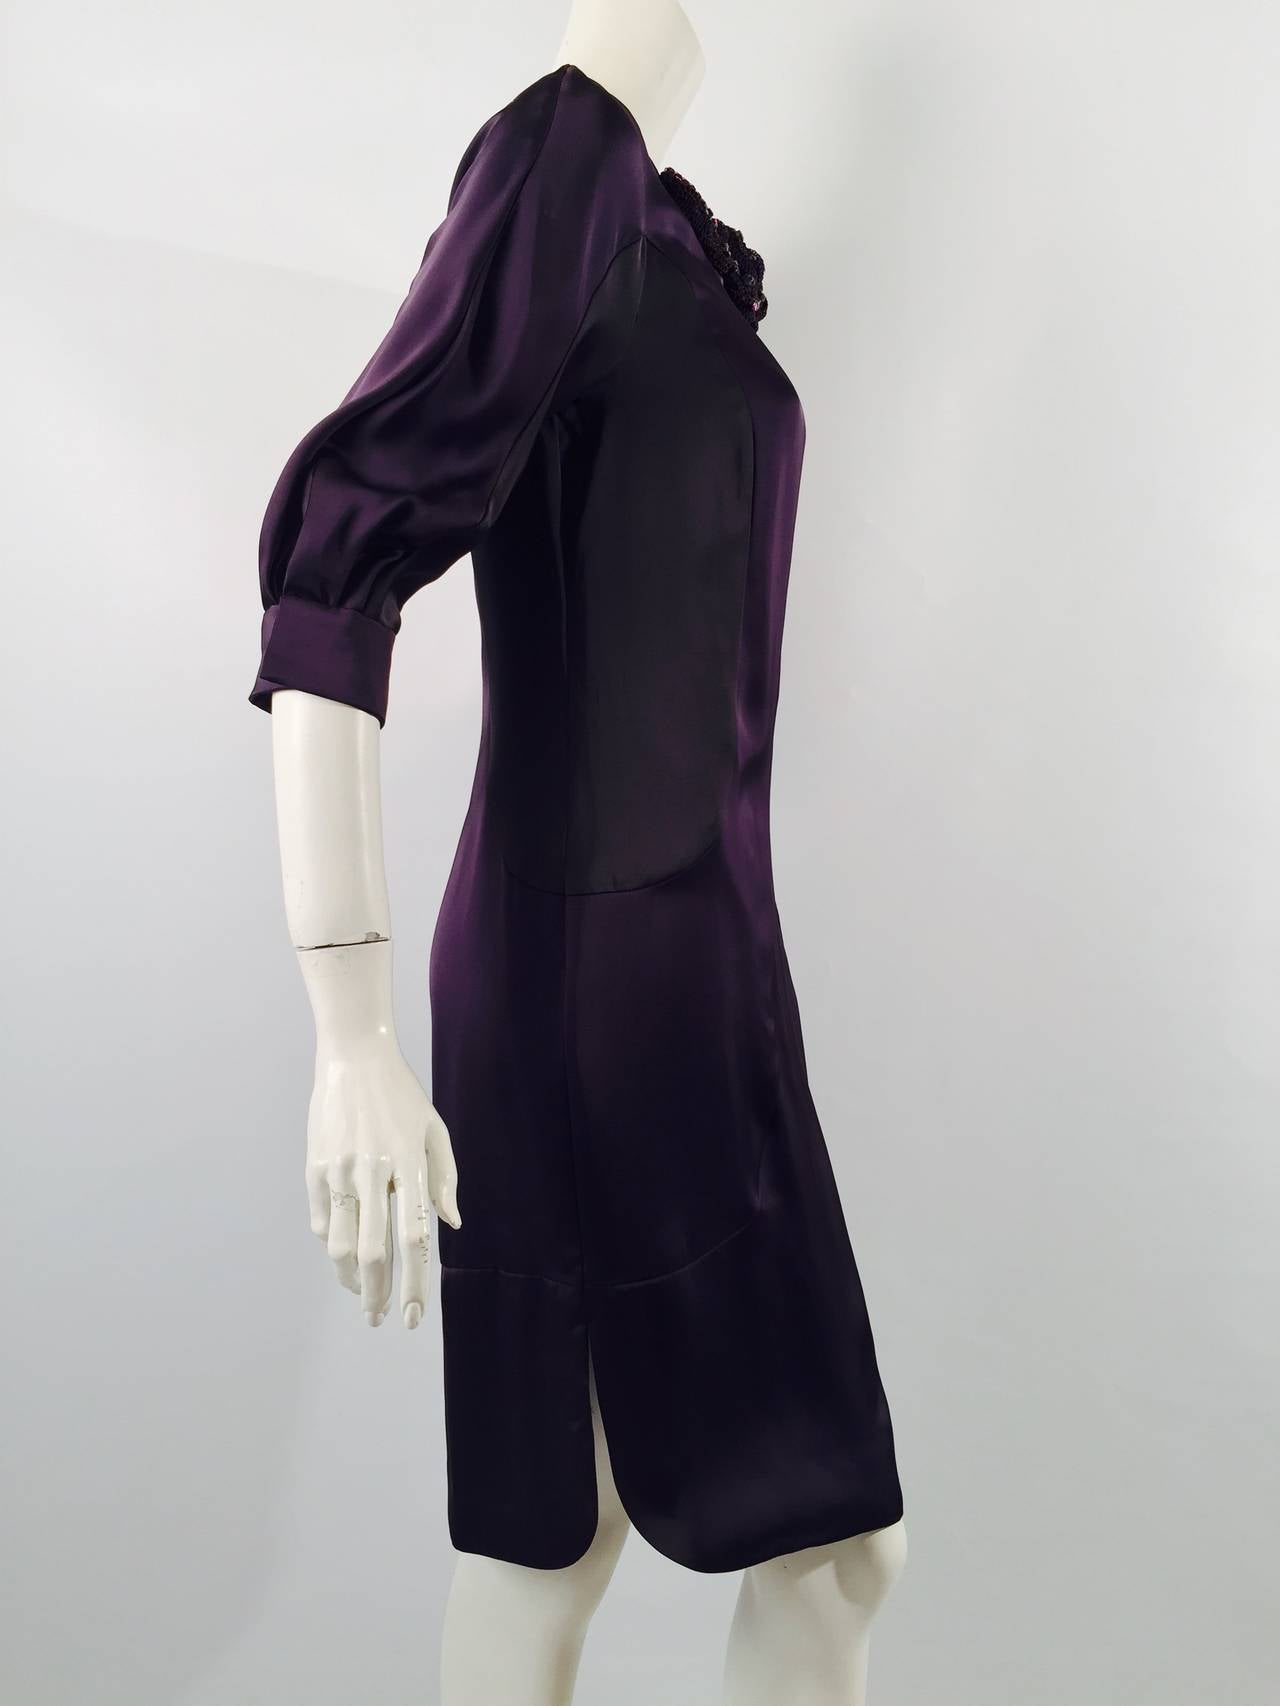 New Valentino Satin Color Block Shift is undeniably chic!  It's all in the details...ultra-luxurious satin, 100% silk lining, and classic design promise to make this a timeless favorite.  Features aubergine and black panels and raglan bracelet